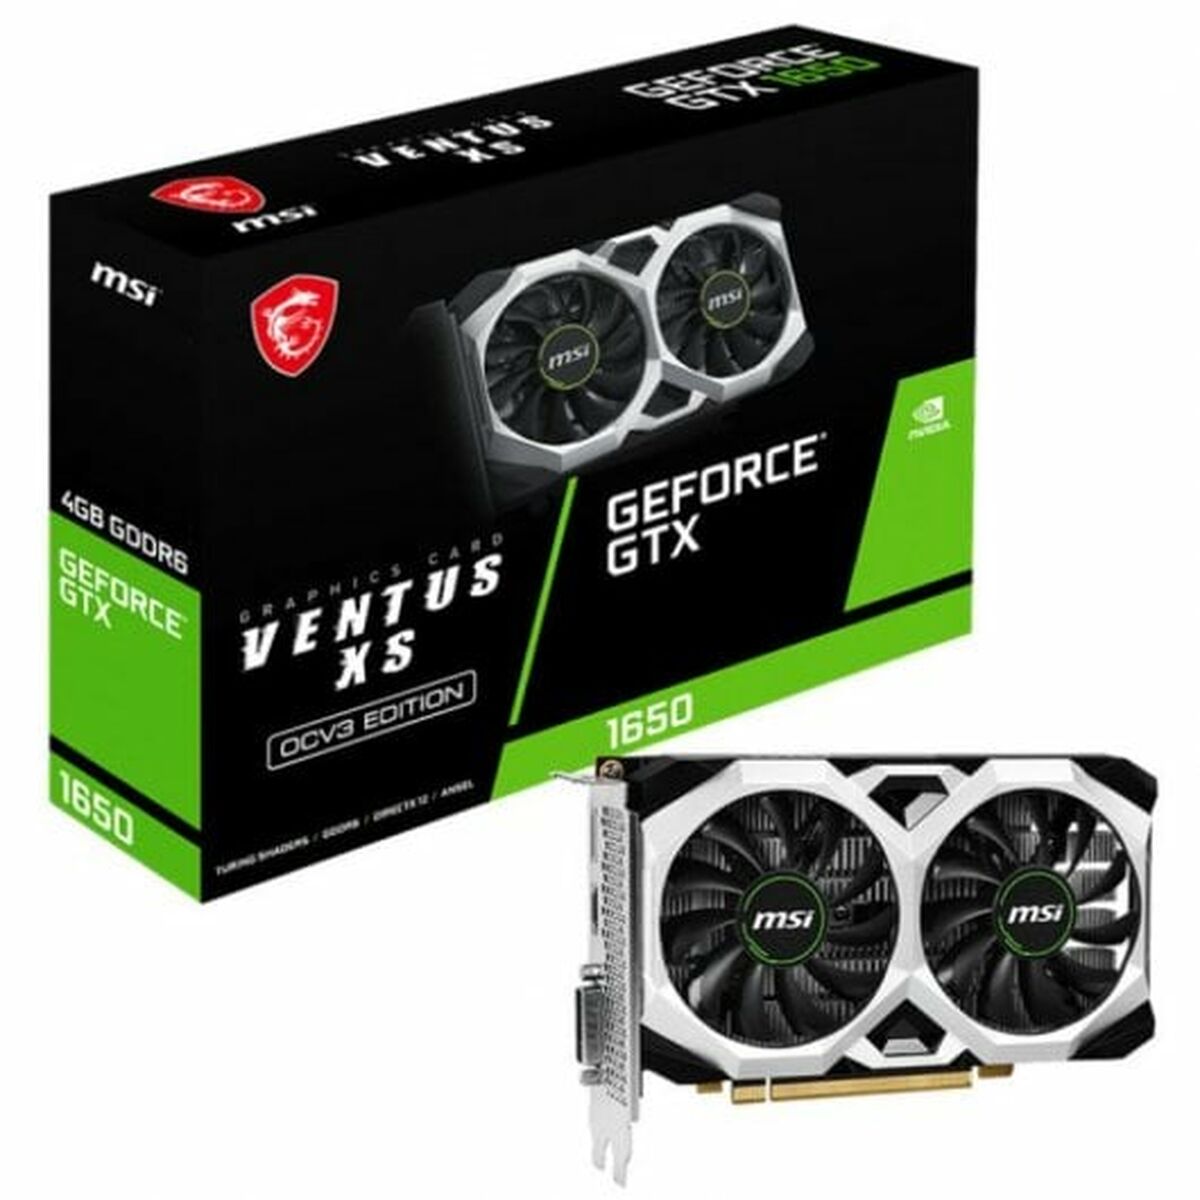 Graphics card MSI GEFORCE GTX 1650 D6 VENTUS XS OCV3 4 GB GDDR6, MSI, Computing, Components, graphics-card-msi-geforce-gtx-1650-d6-ventus-xs-ocv3-4-gb-gddr6, Brand_MSI, category-reference-2609, category-reference-2803, category-reference-2812, category-reference-t-19685, category-reference-t-19912, category-reference-t-21360, category-reference-t-25665, computers / components, Condition_NEW, Price_100 - 200, Teleworking, RiotNook